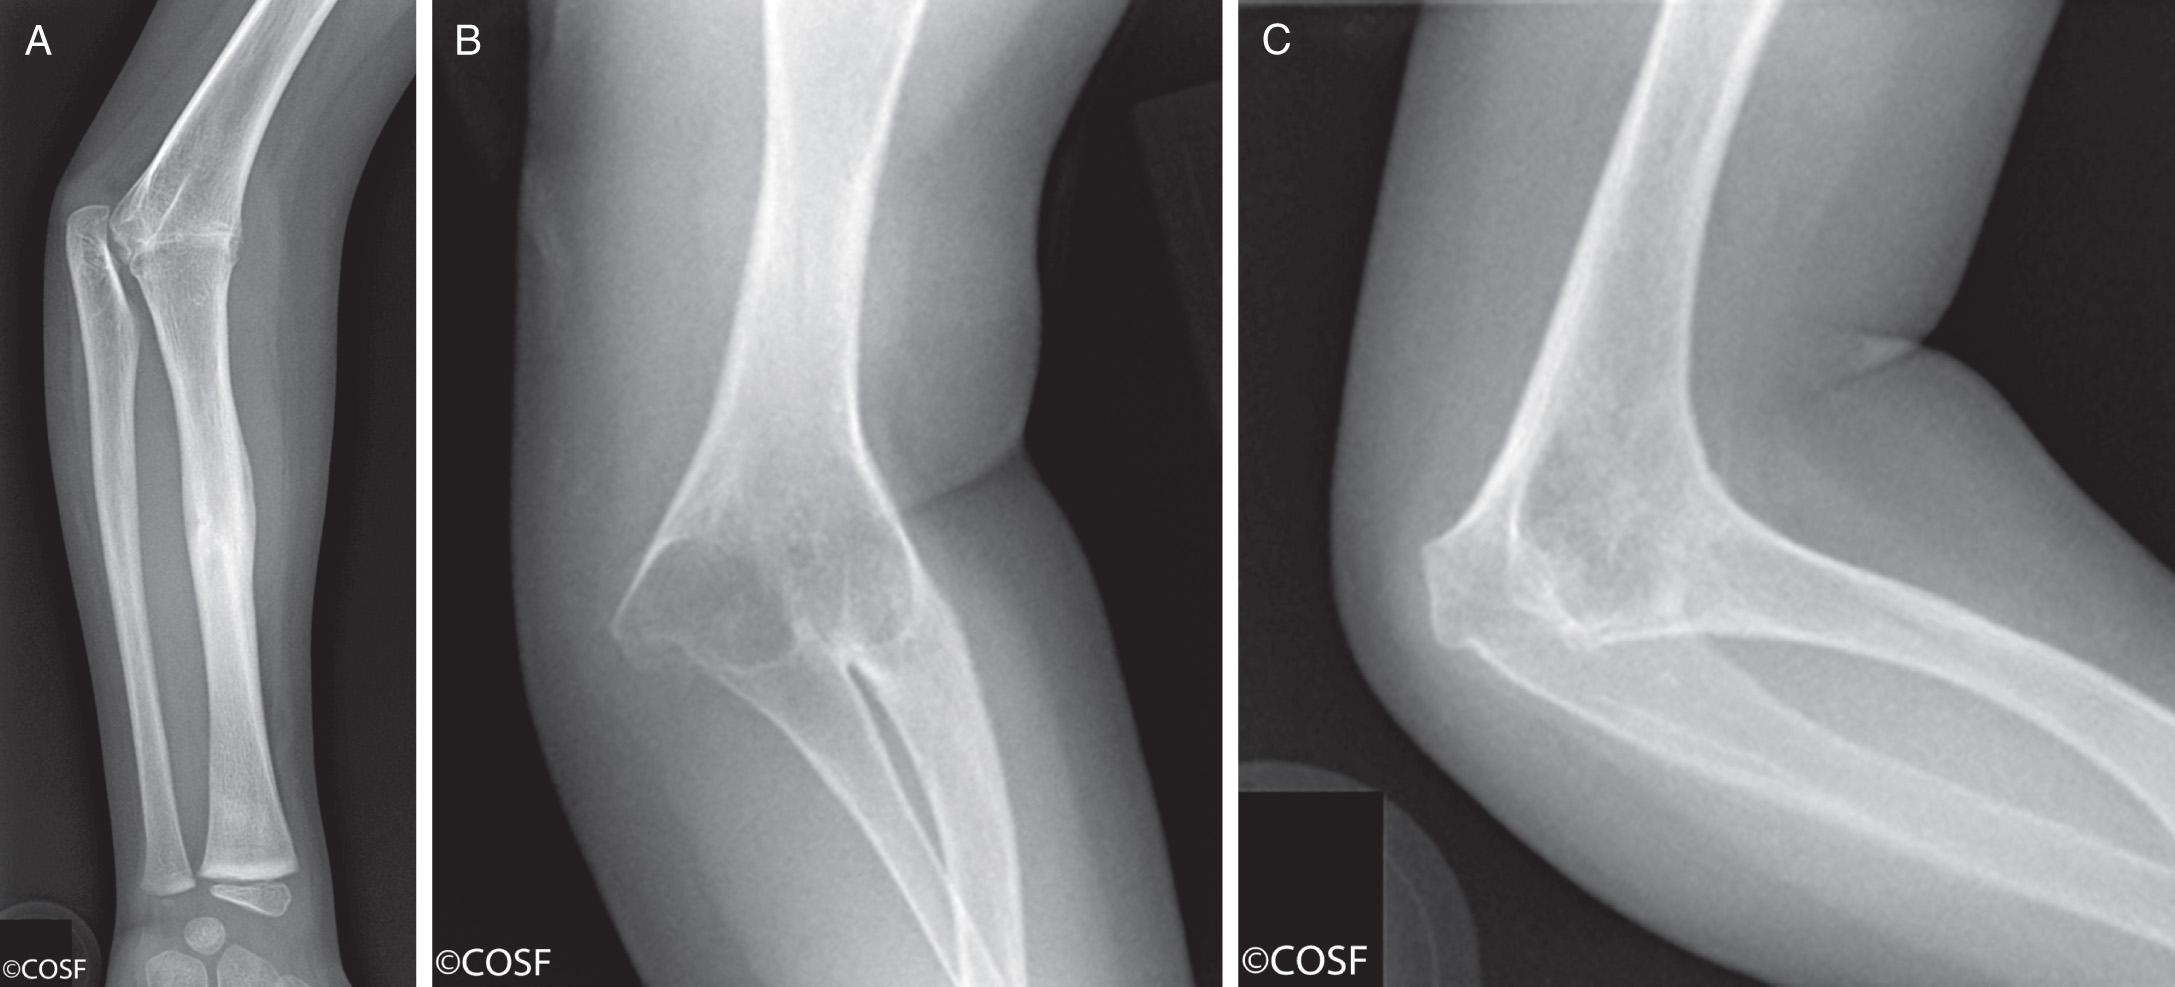 FIG 26.8, (A) Radiograph of typical radiohumeral synostosis. (B) Anteroposterior radiograph of humeroradioulnar synostosis. (C) Lateral radiograph of humeroradioulnar synostosis.